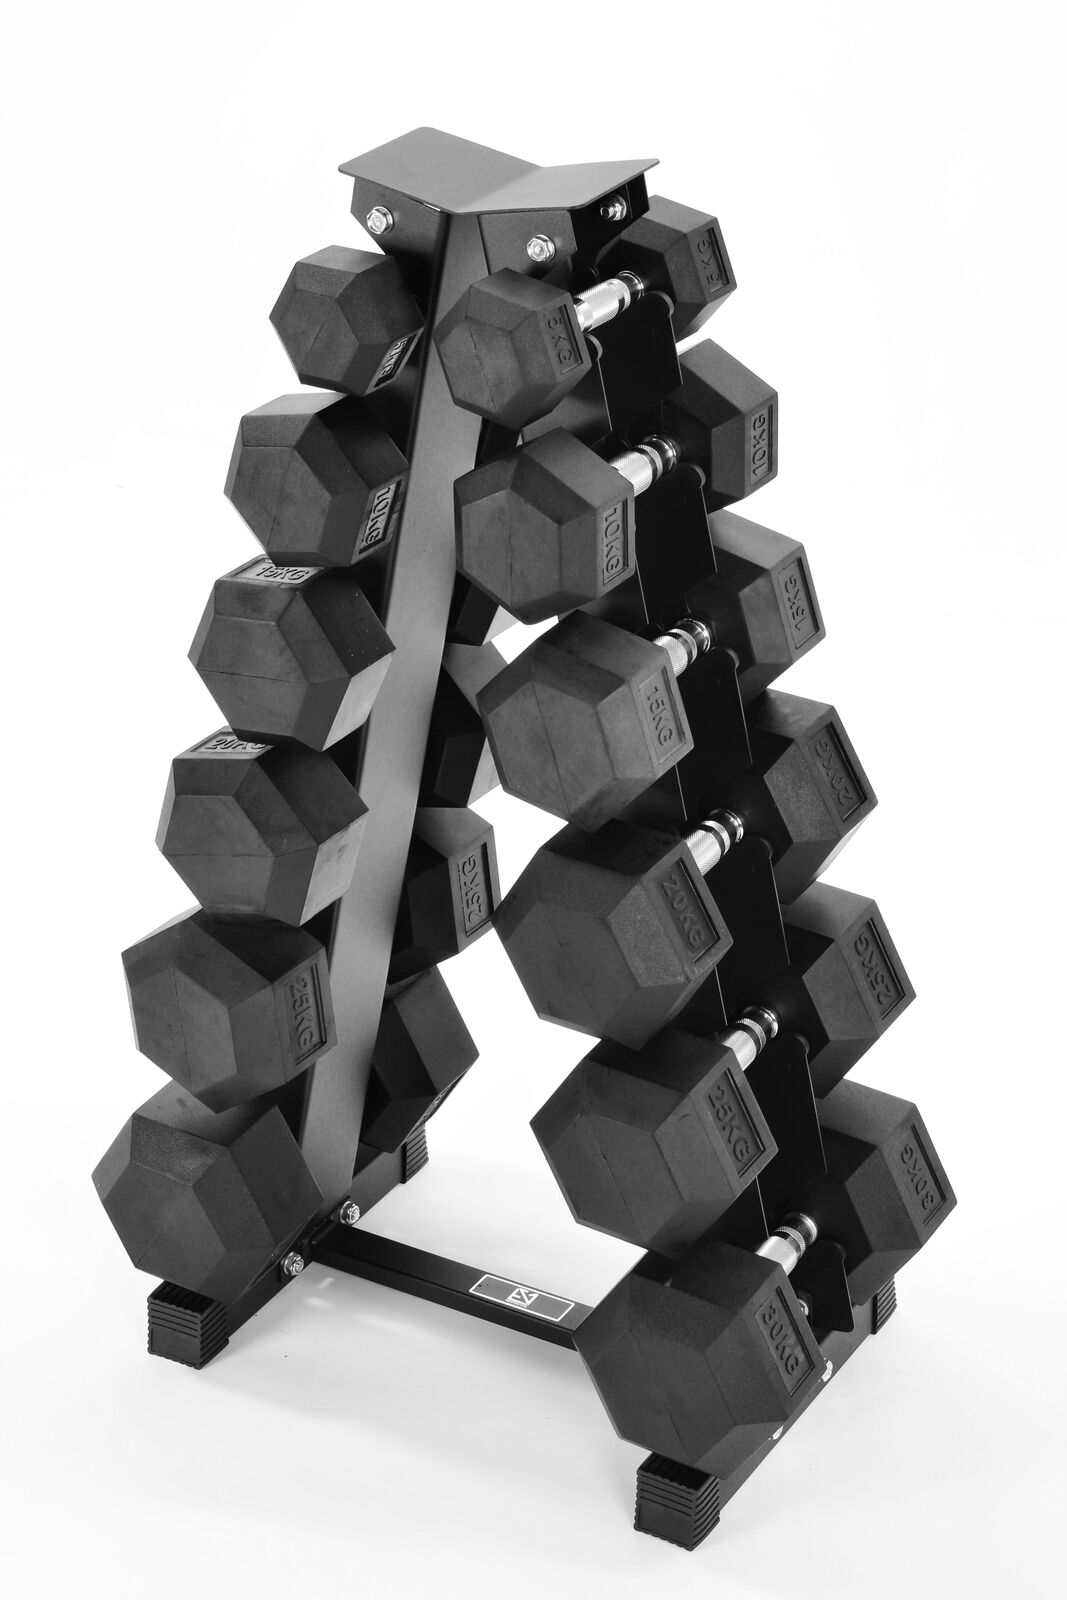 Hex Dumbbell Set With Dumbbell Rack - 2.5 To 15 Kg (6 Pairs)